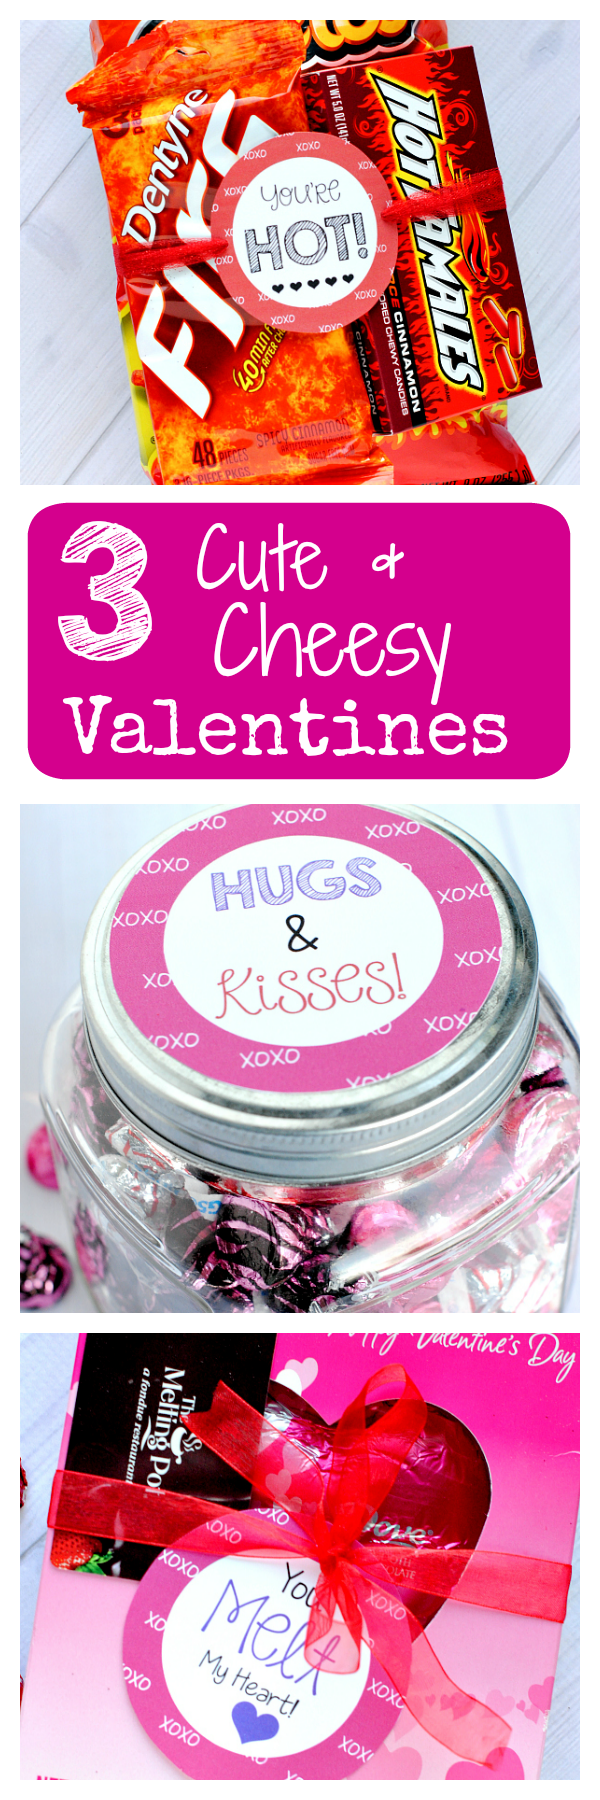 3 Cheesy Valentine's Gifts for the Man You LOVE! All You need to do is add a tag to these Valentine's gifts and you've got something sweet and simple for your husband for Valentine's day. #valentinesday